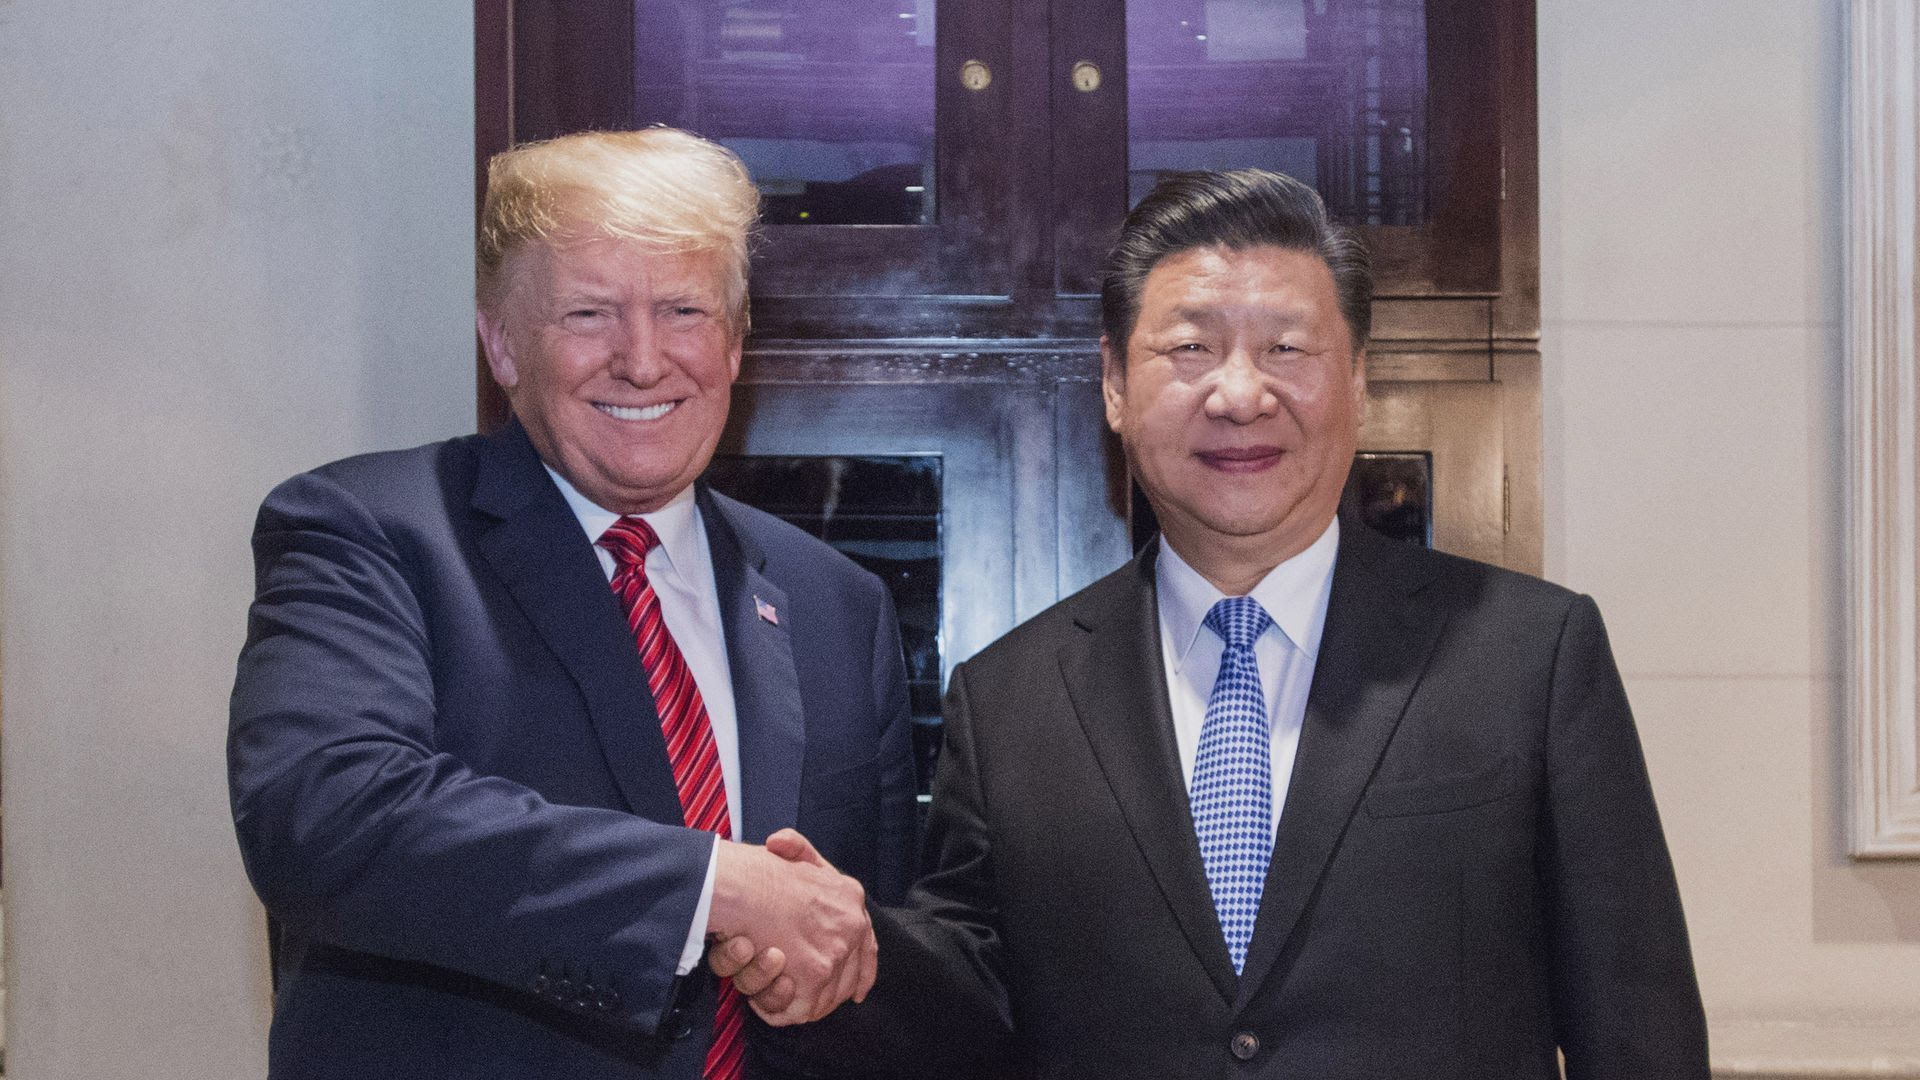 President Trump and Chinese President Xi Jinping smile while shaking hands 